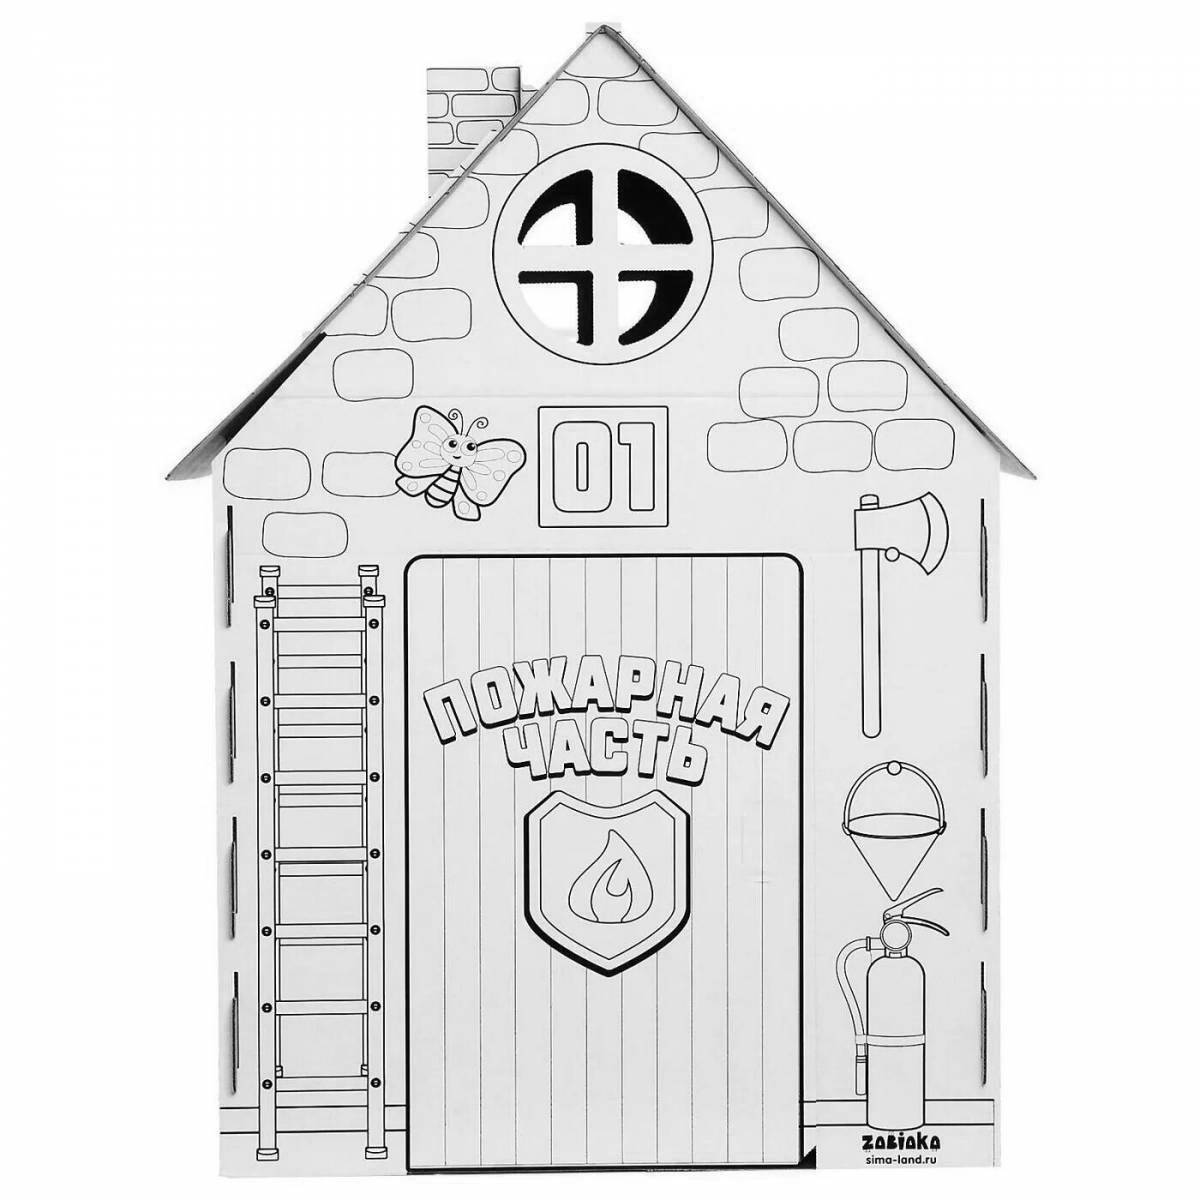 Intriguing coloring page price of a cardboard house